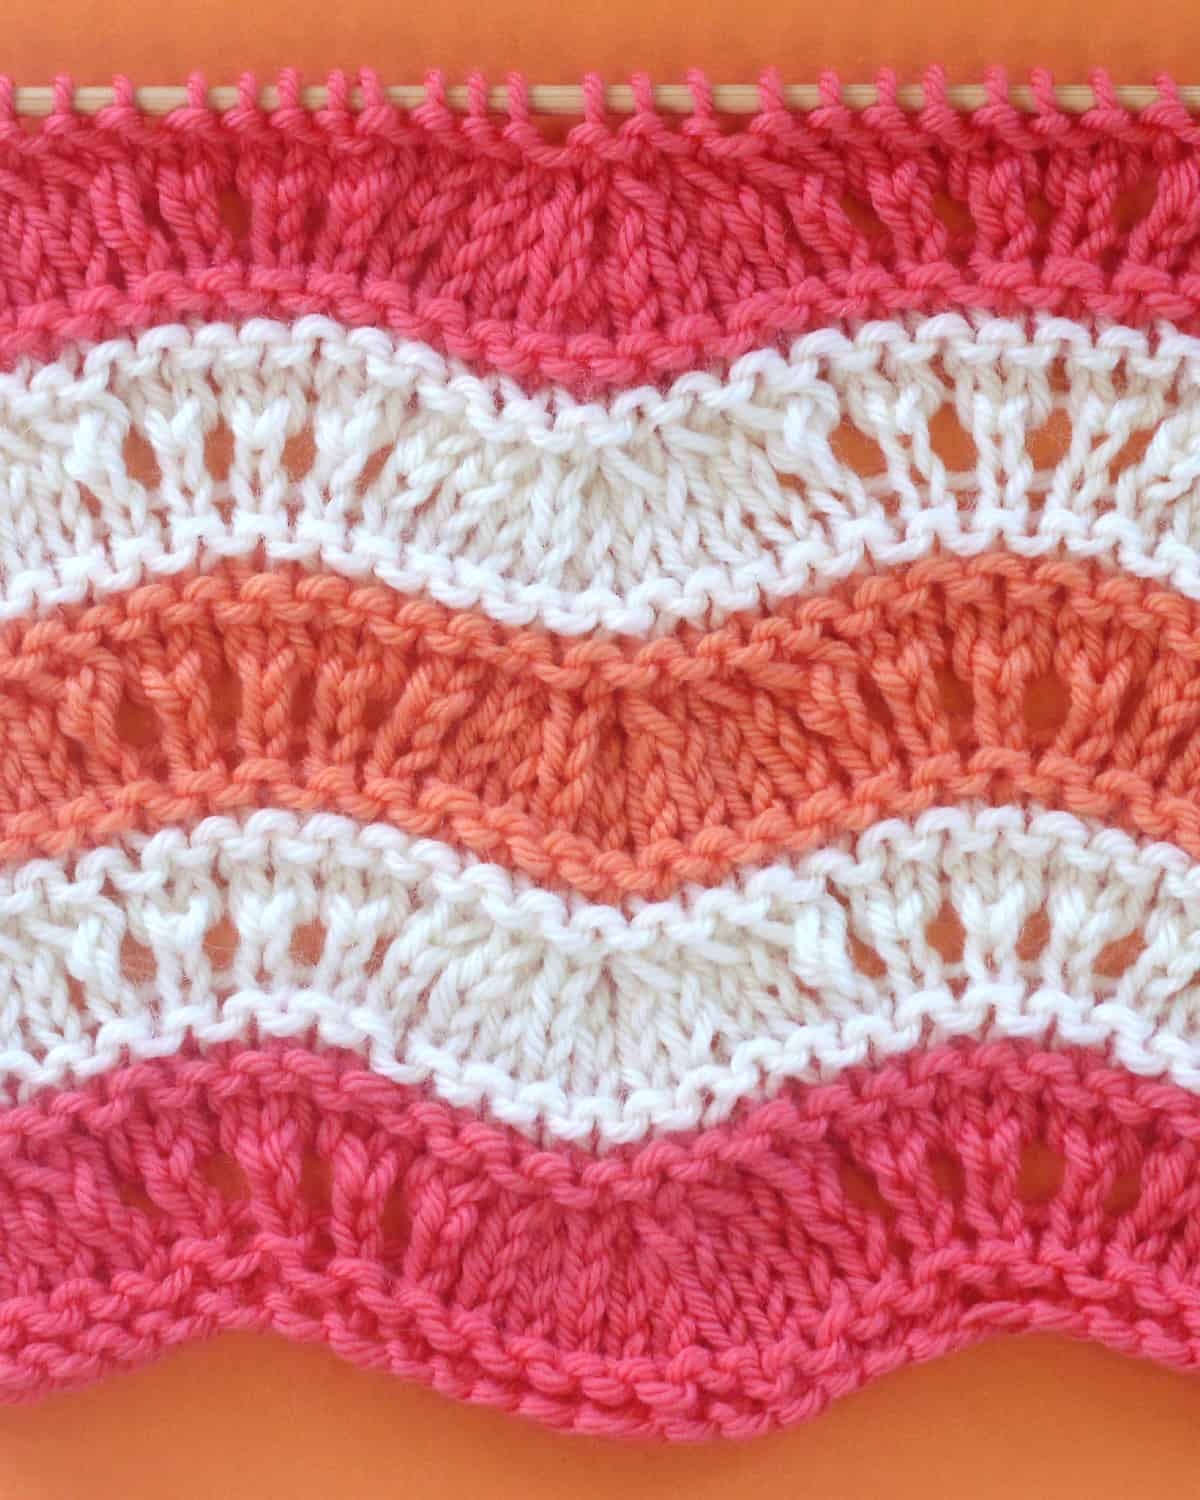 Ripple Ridge knit stitch texture in alternating yarn colors of pink, orange, and white on a wooden bamboo knitting needle.